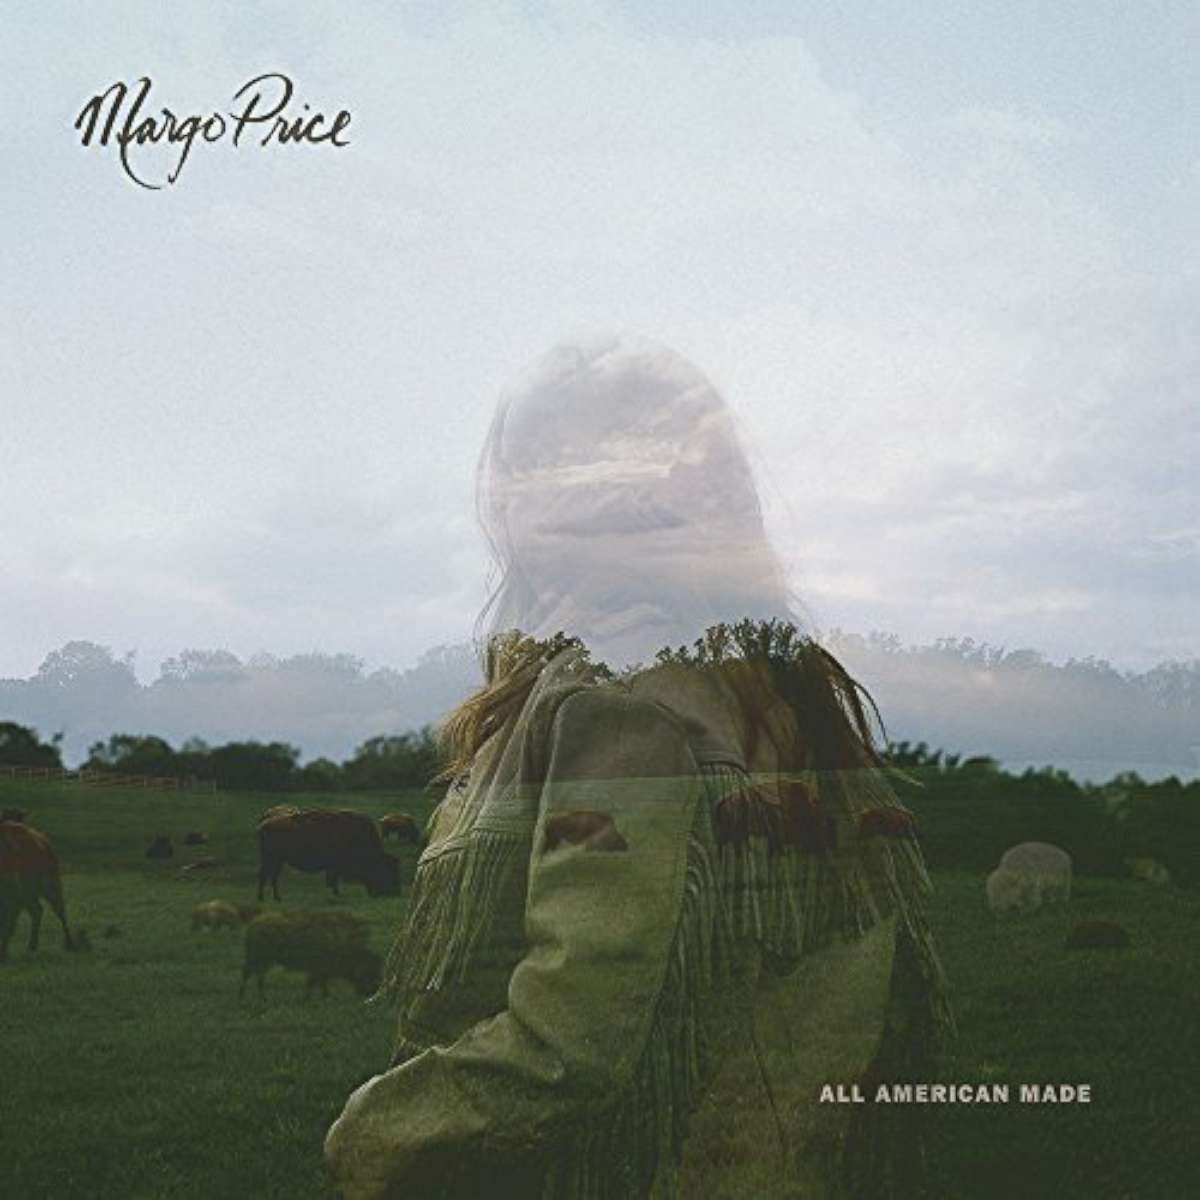 PHOTO: Margo Price - "All American Made"